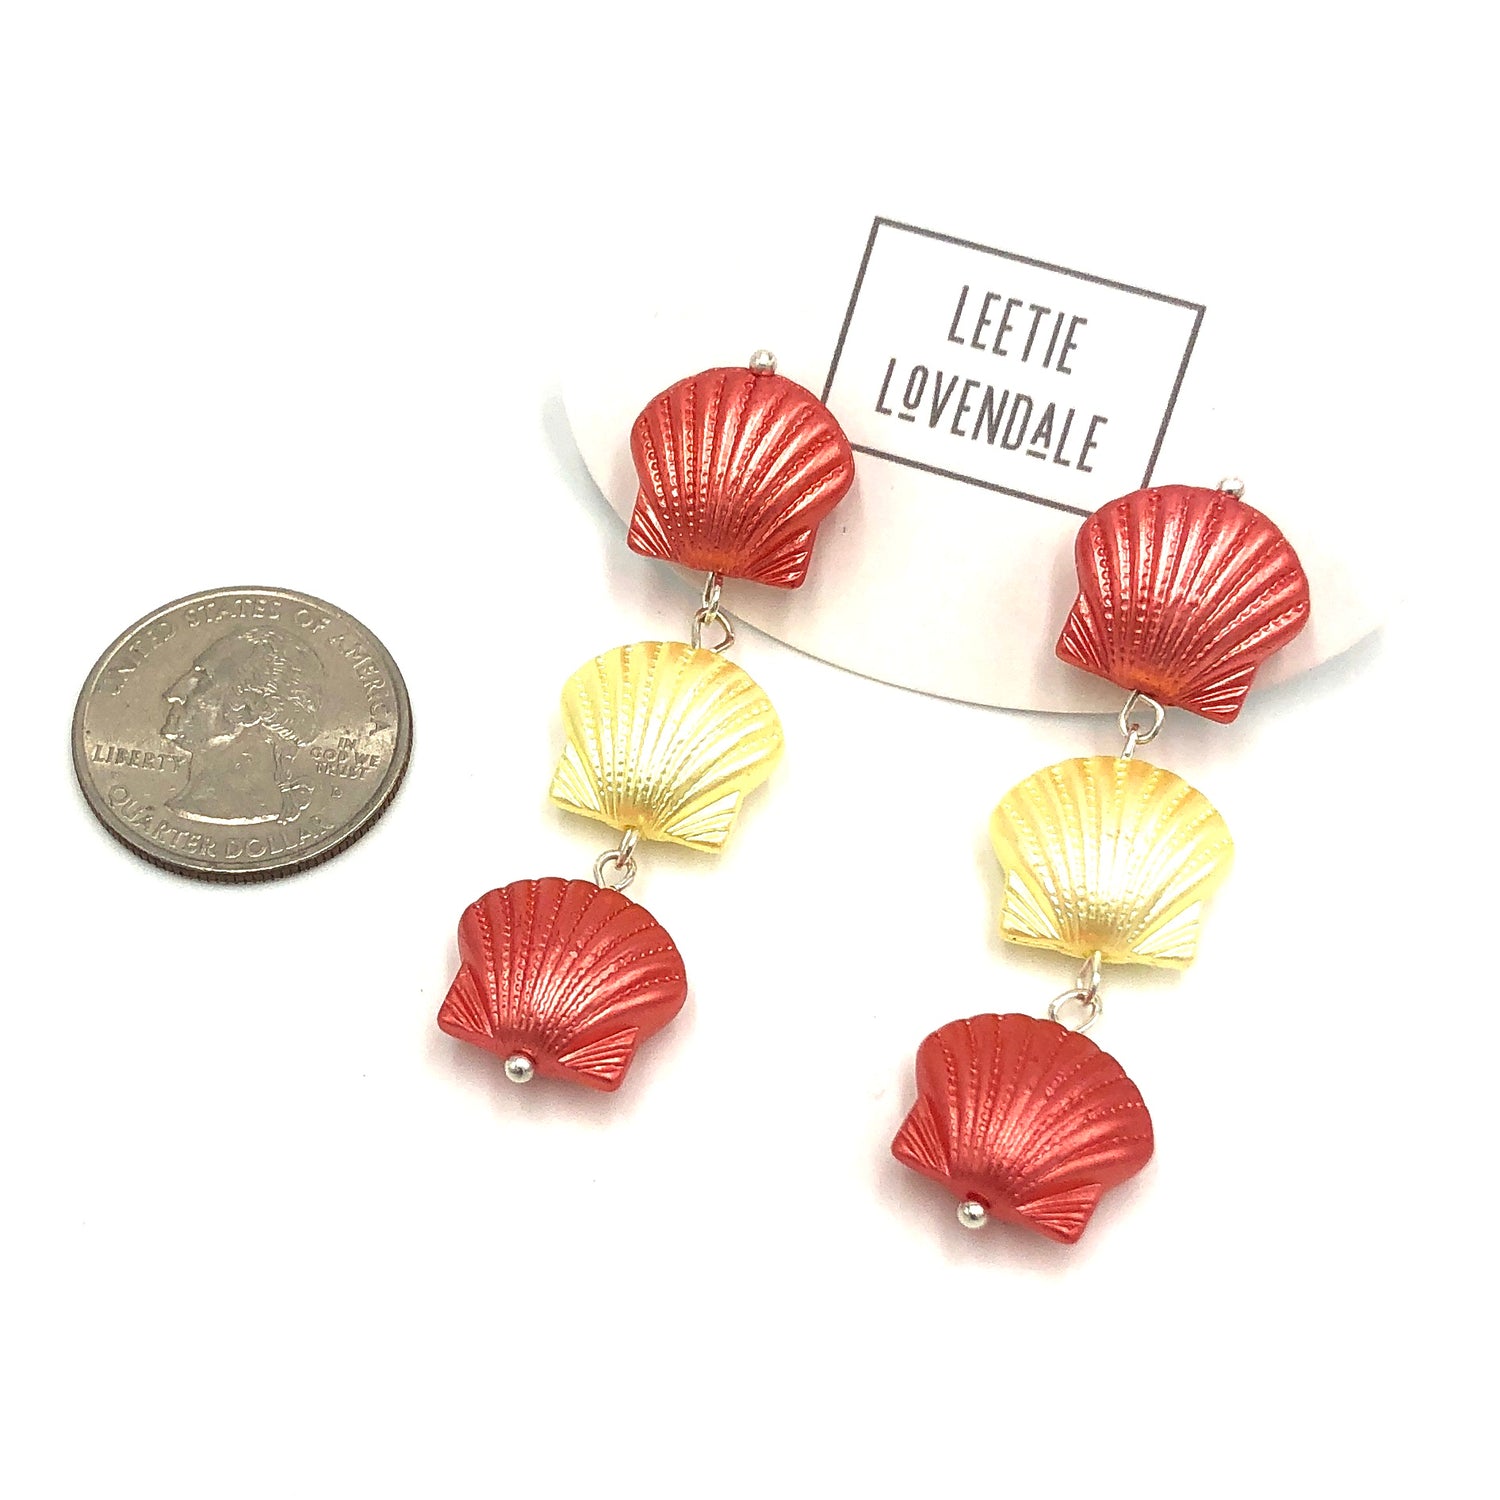 quarter in picture next to seashell style earrings to show size